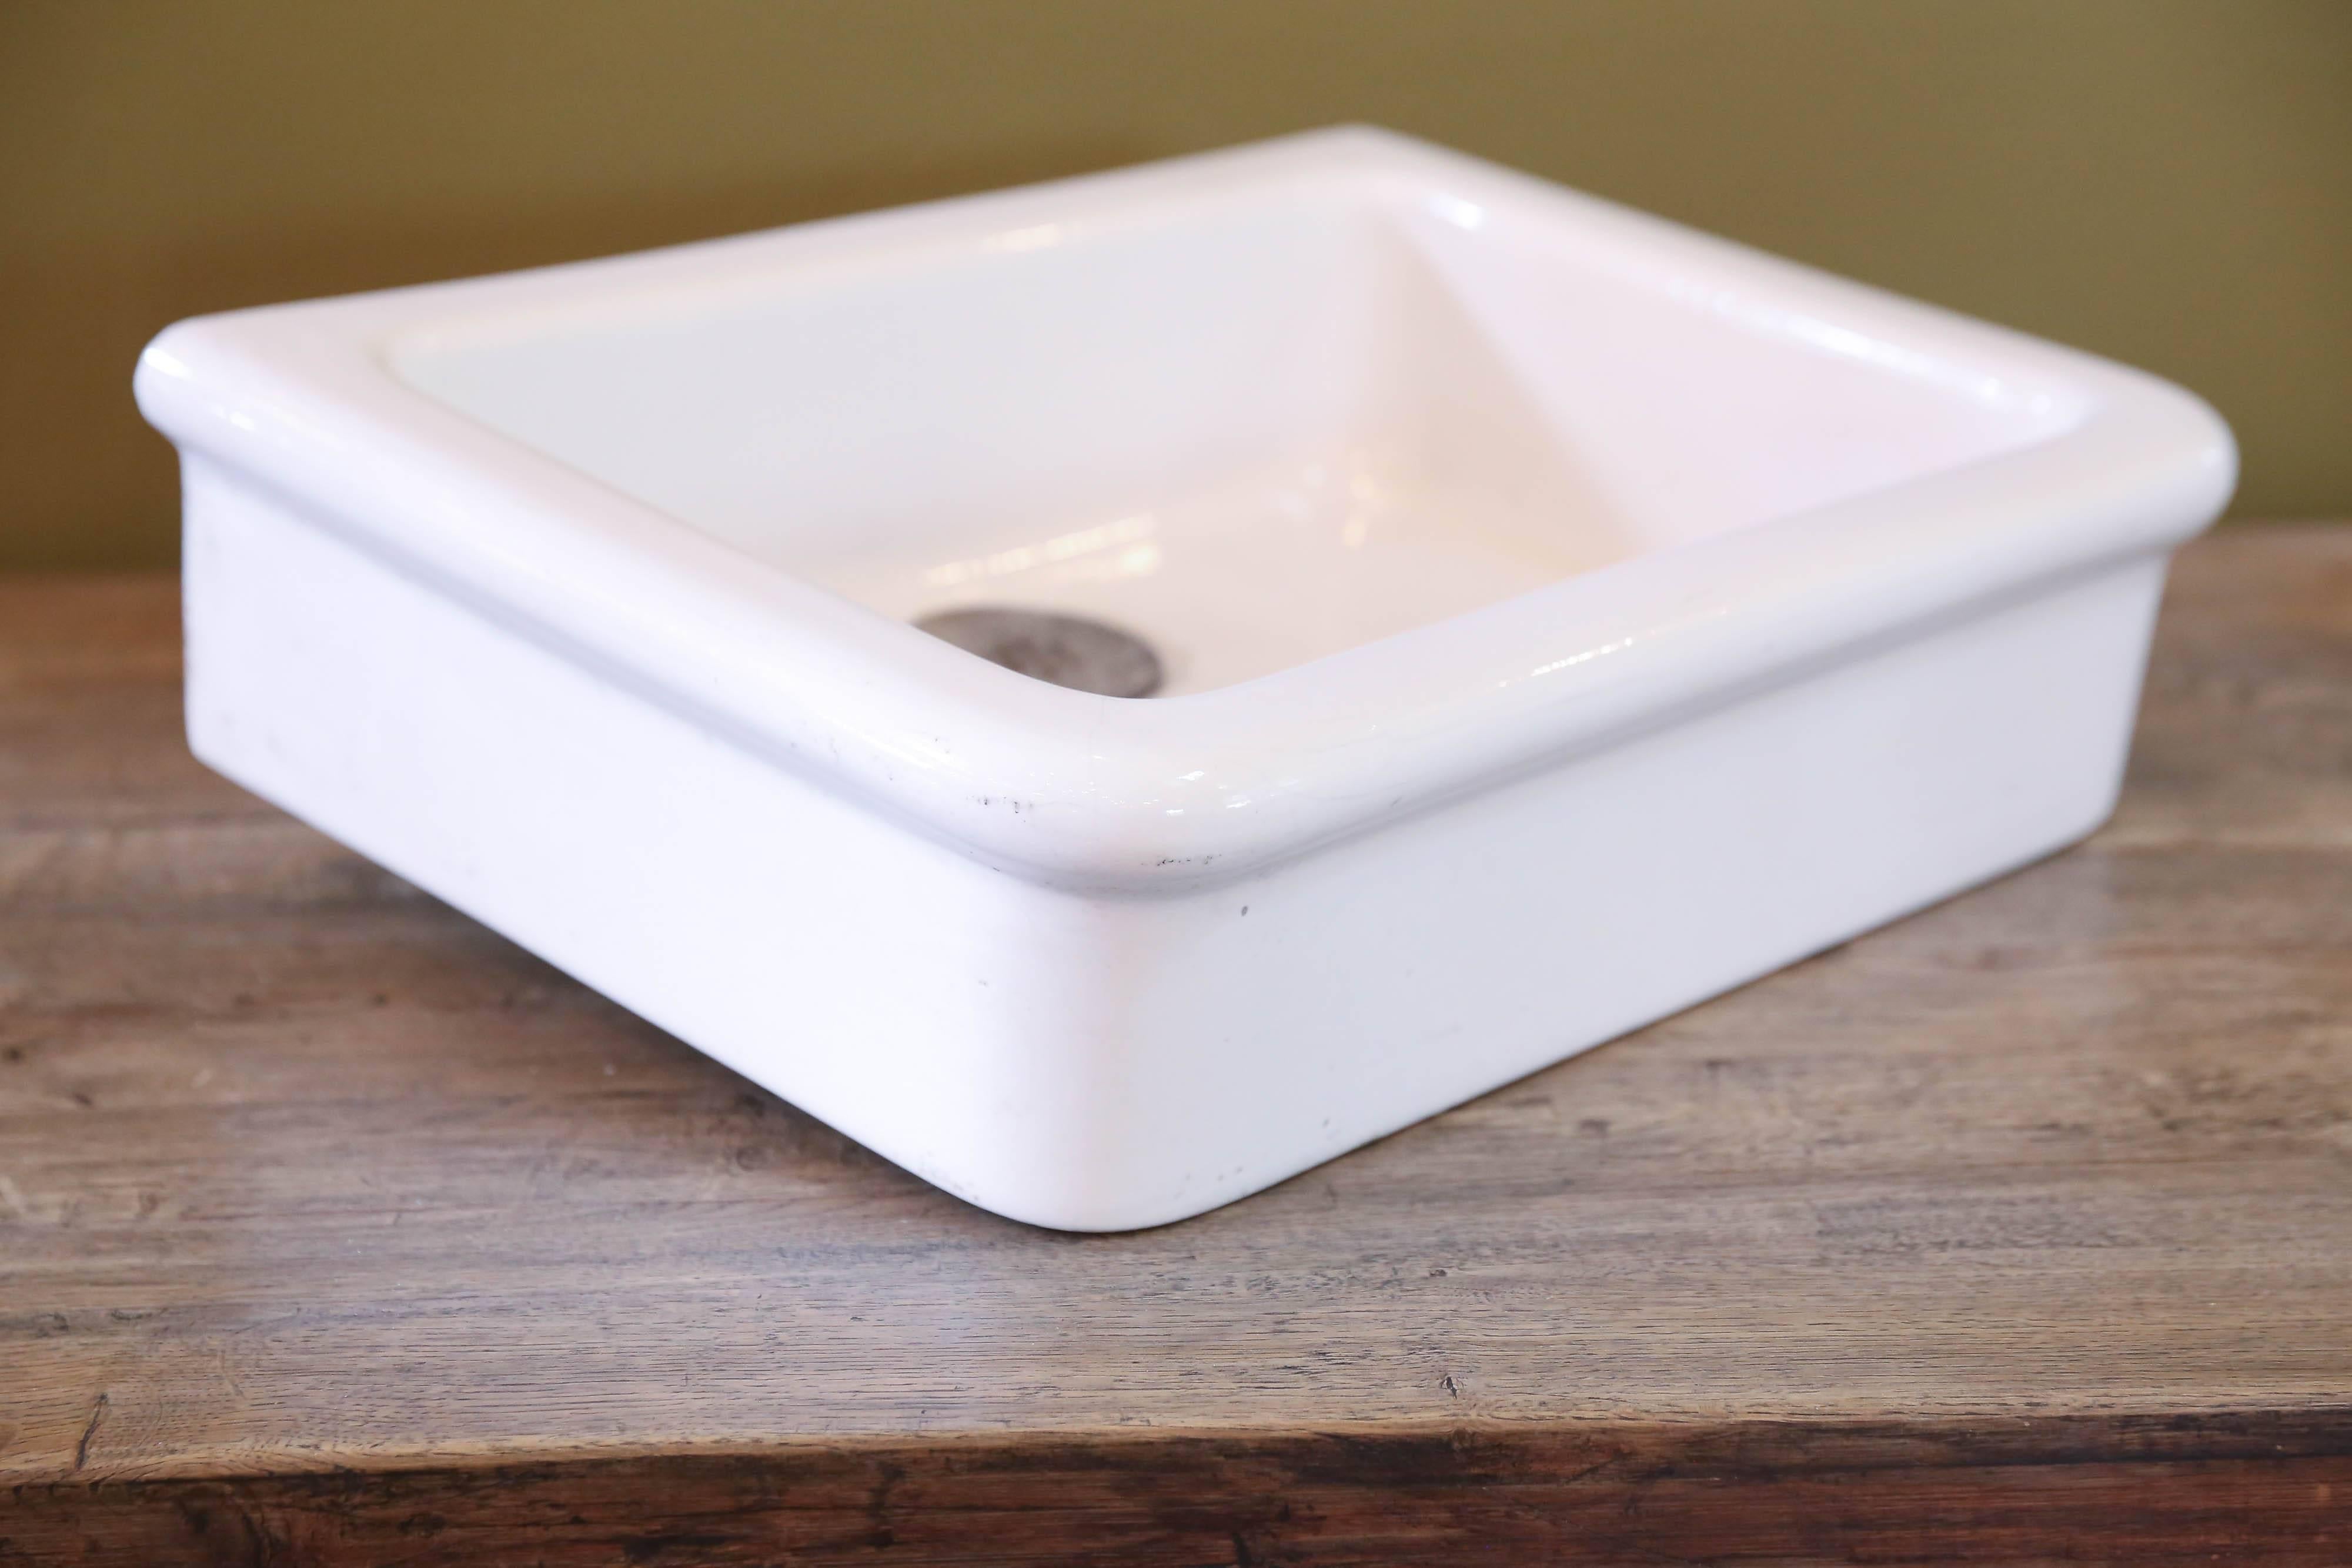 All original, white porcelain sink with metal drainage cover. Farmhouse style with flat back and rounded right angles. From France, circa 1900. Interior depth of sink is 4.5 inches high.